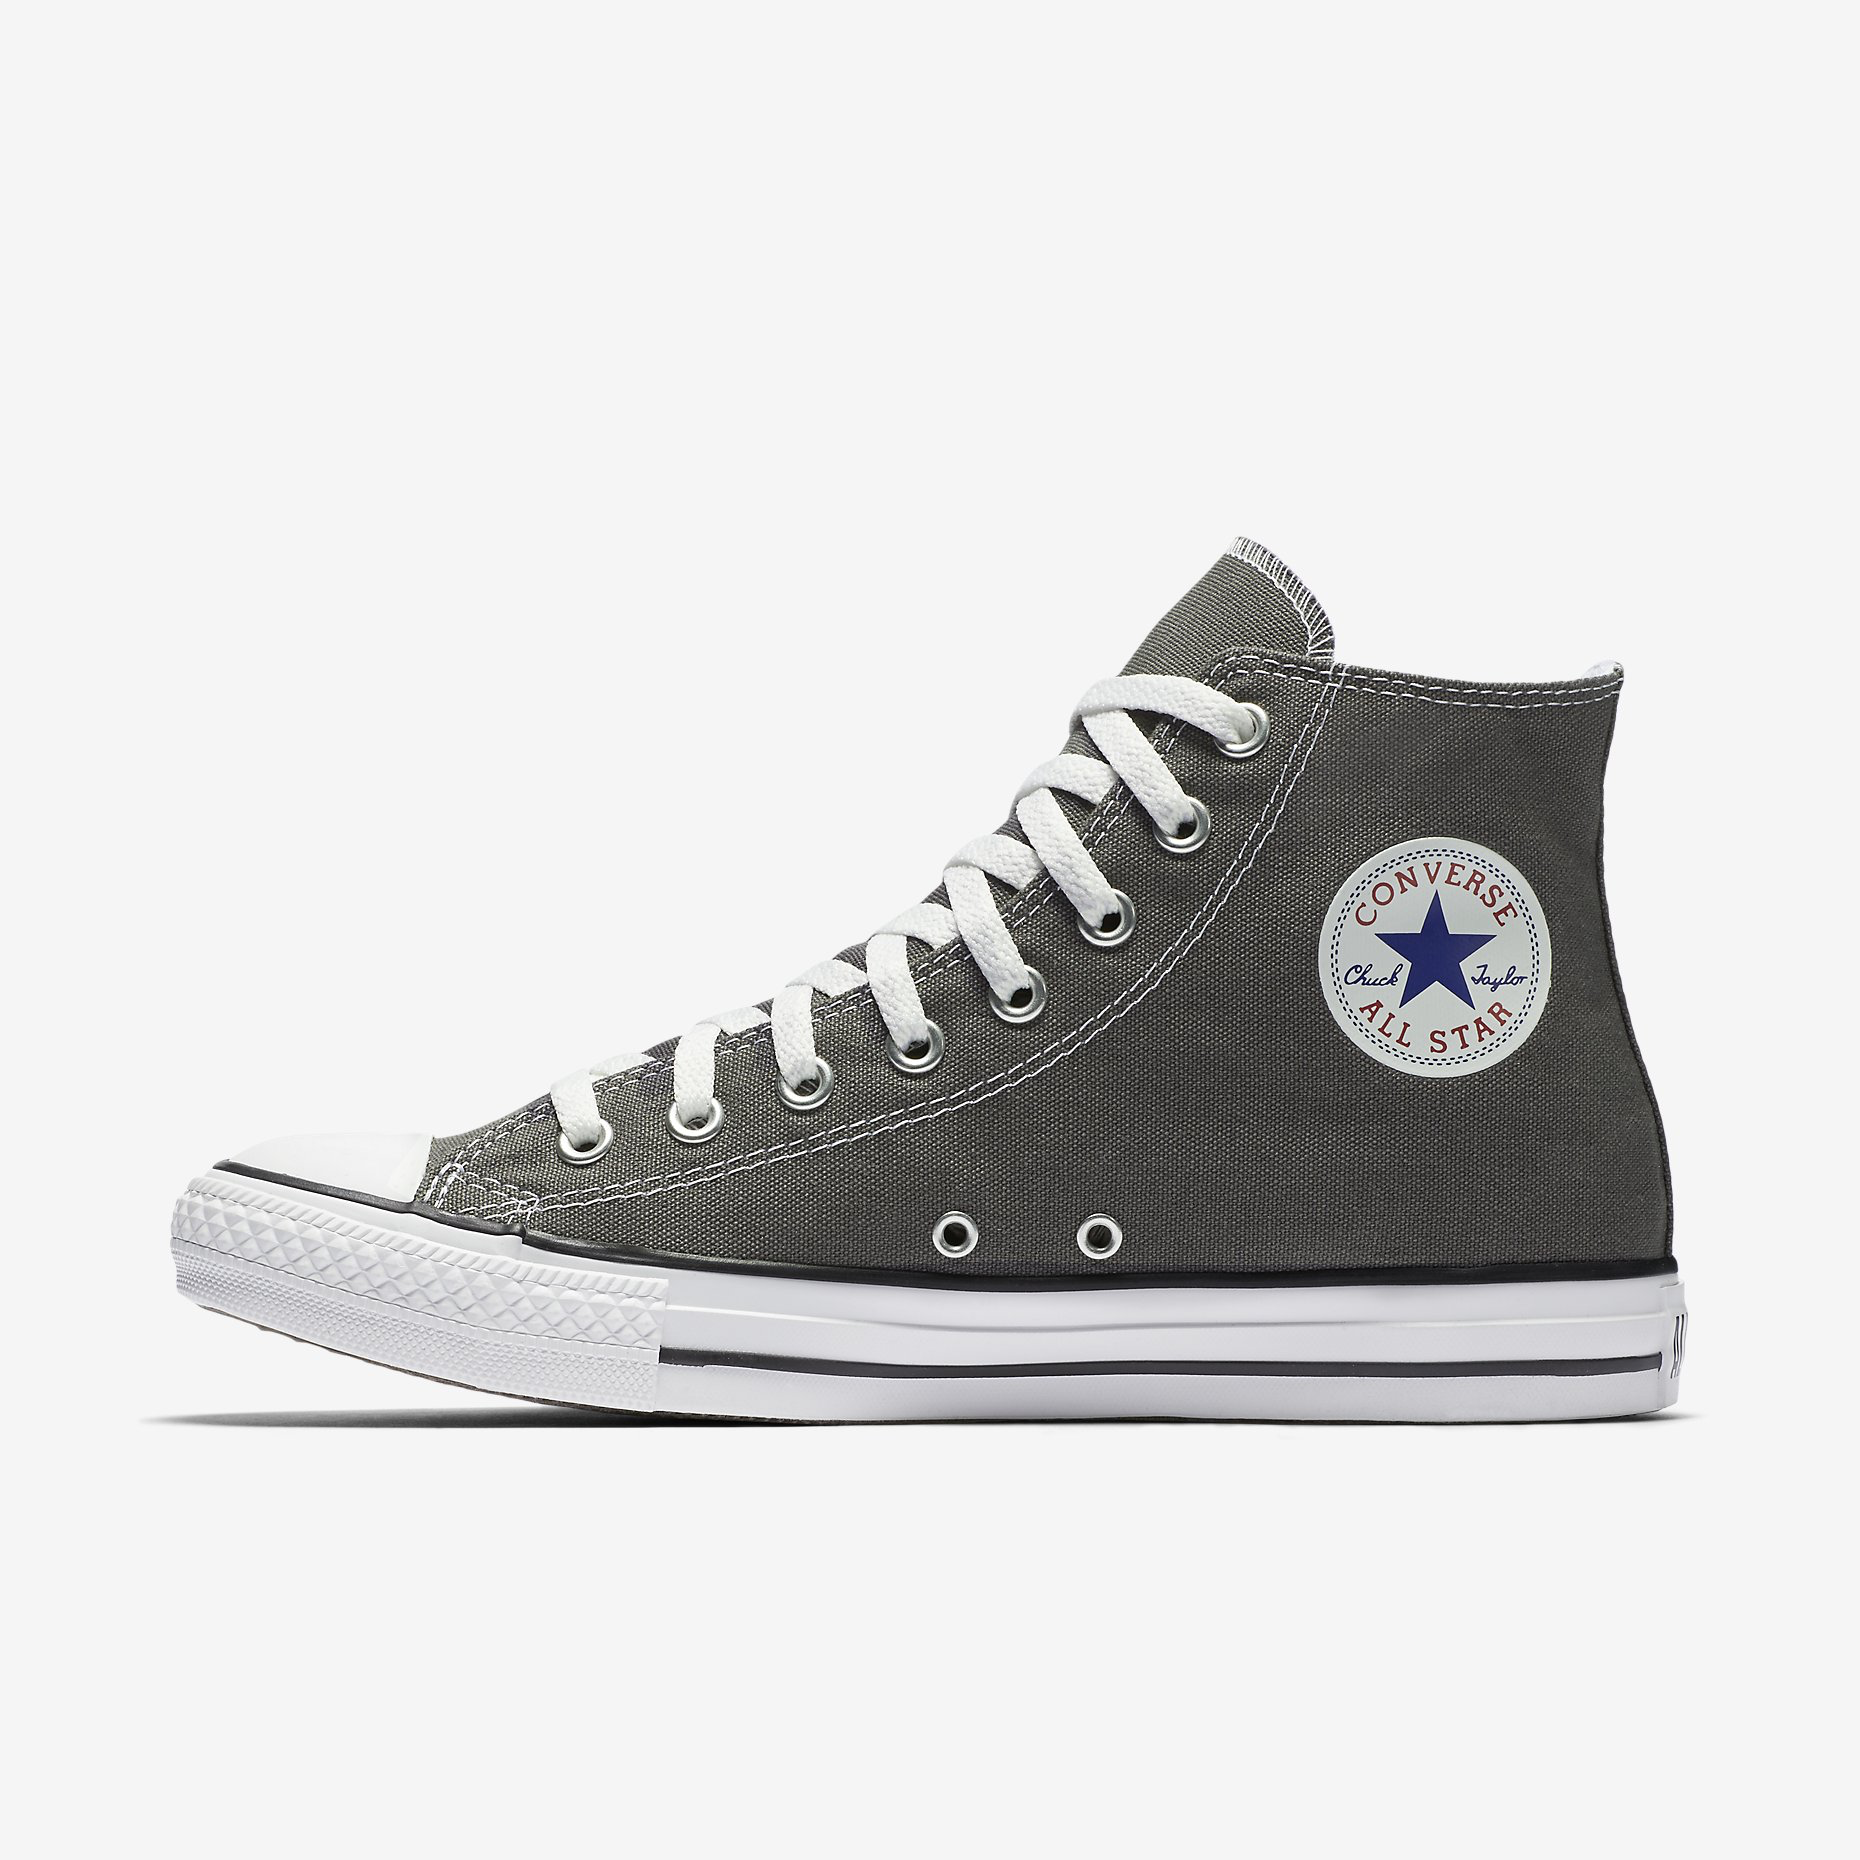 charcoal converse high tops